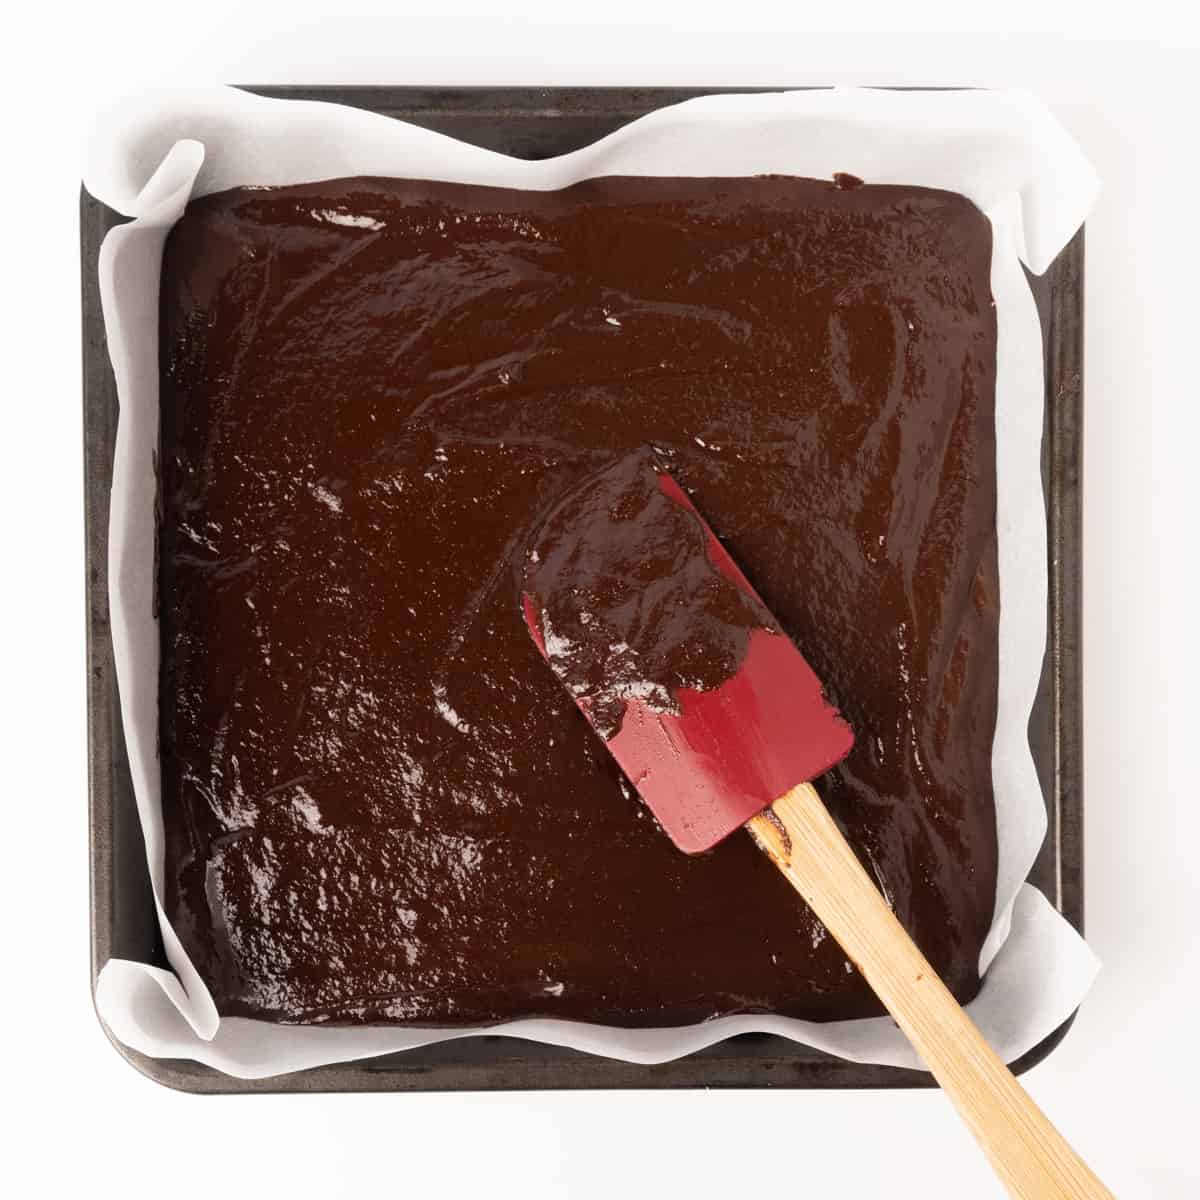 The warm fudge mixture spread out in a lined tray.